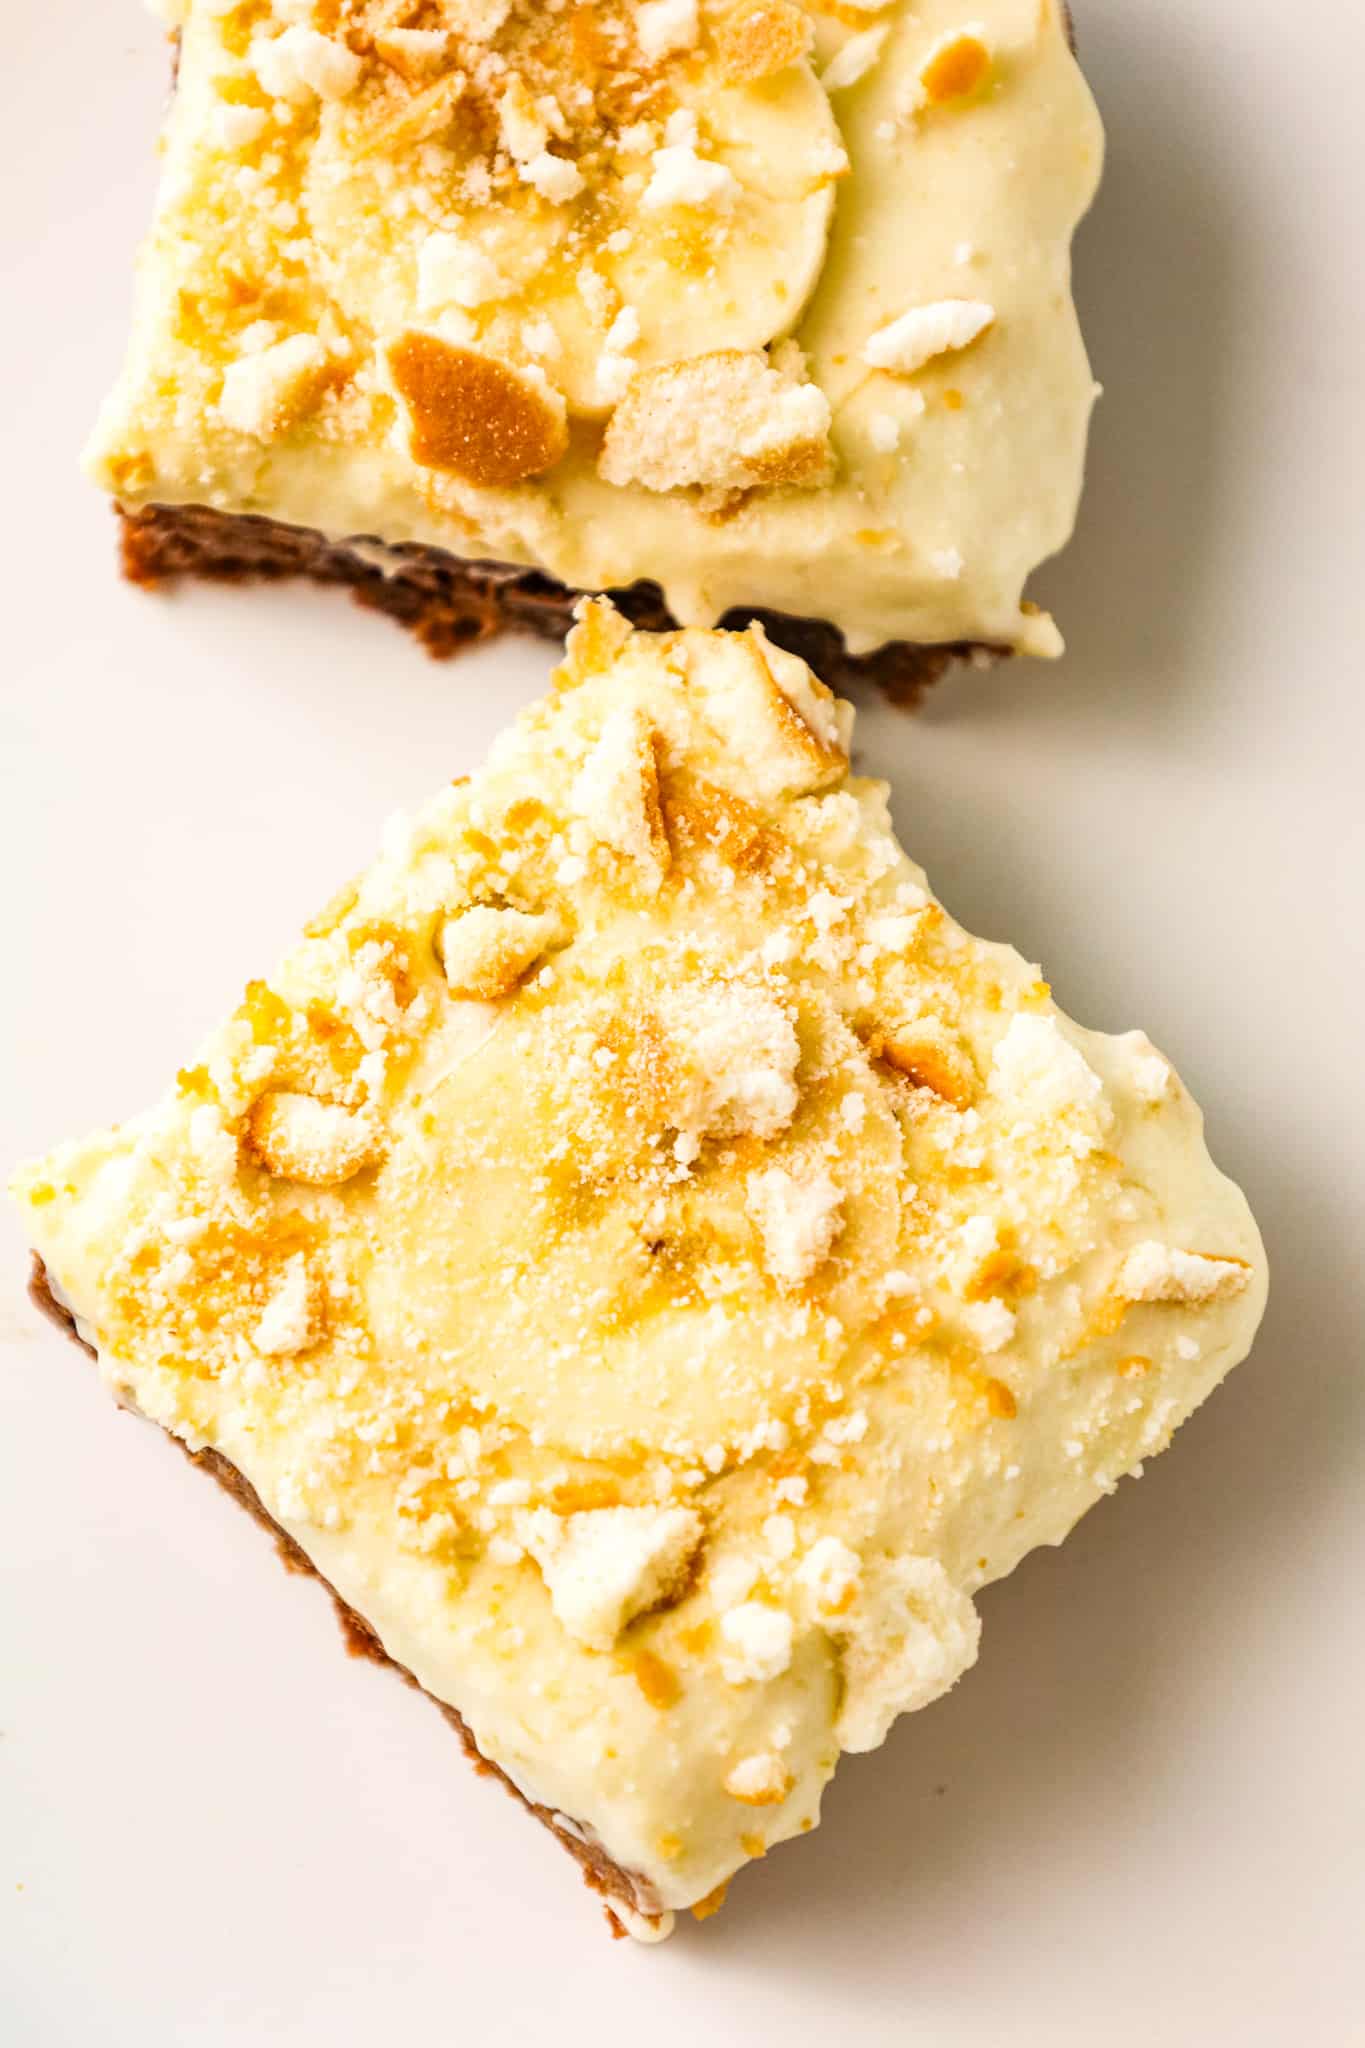 Banana Pudding Brownies are a decadent dessert with a fudgy chocolate brownie base topped with a banana pudding and Cool Whip mixture, sliced bananas and crumbled vanilla wafer cookies.